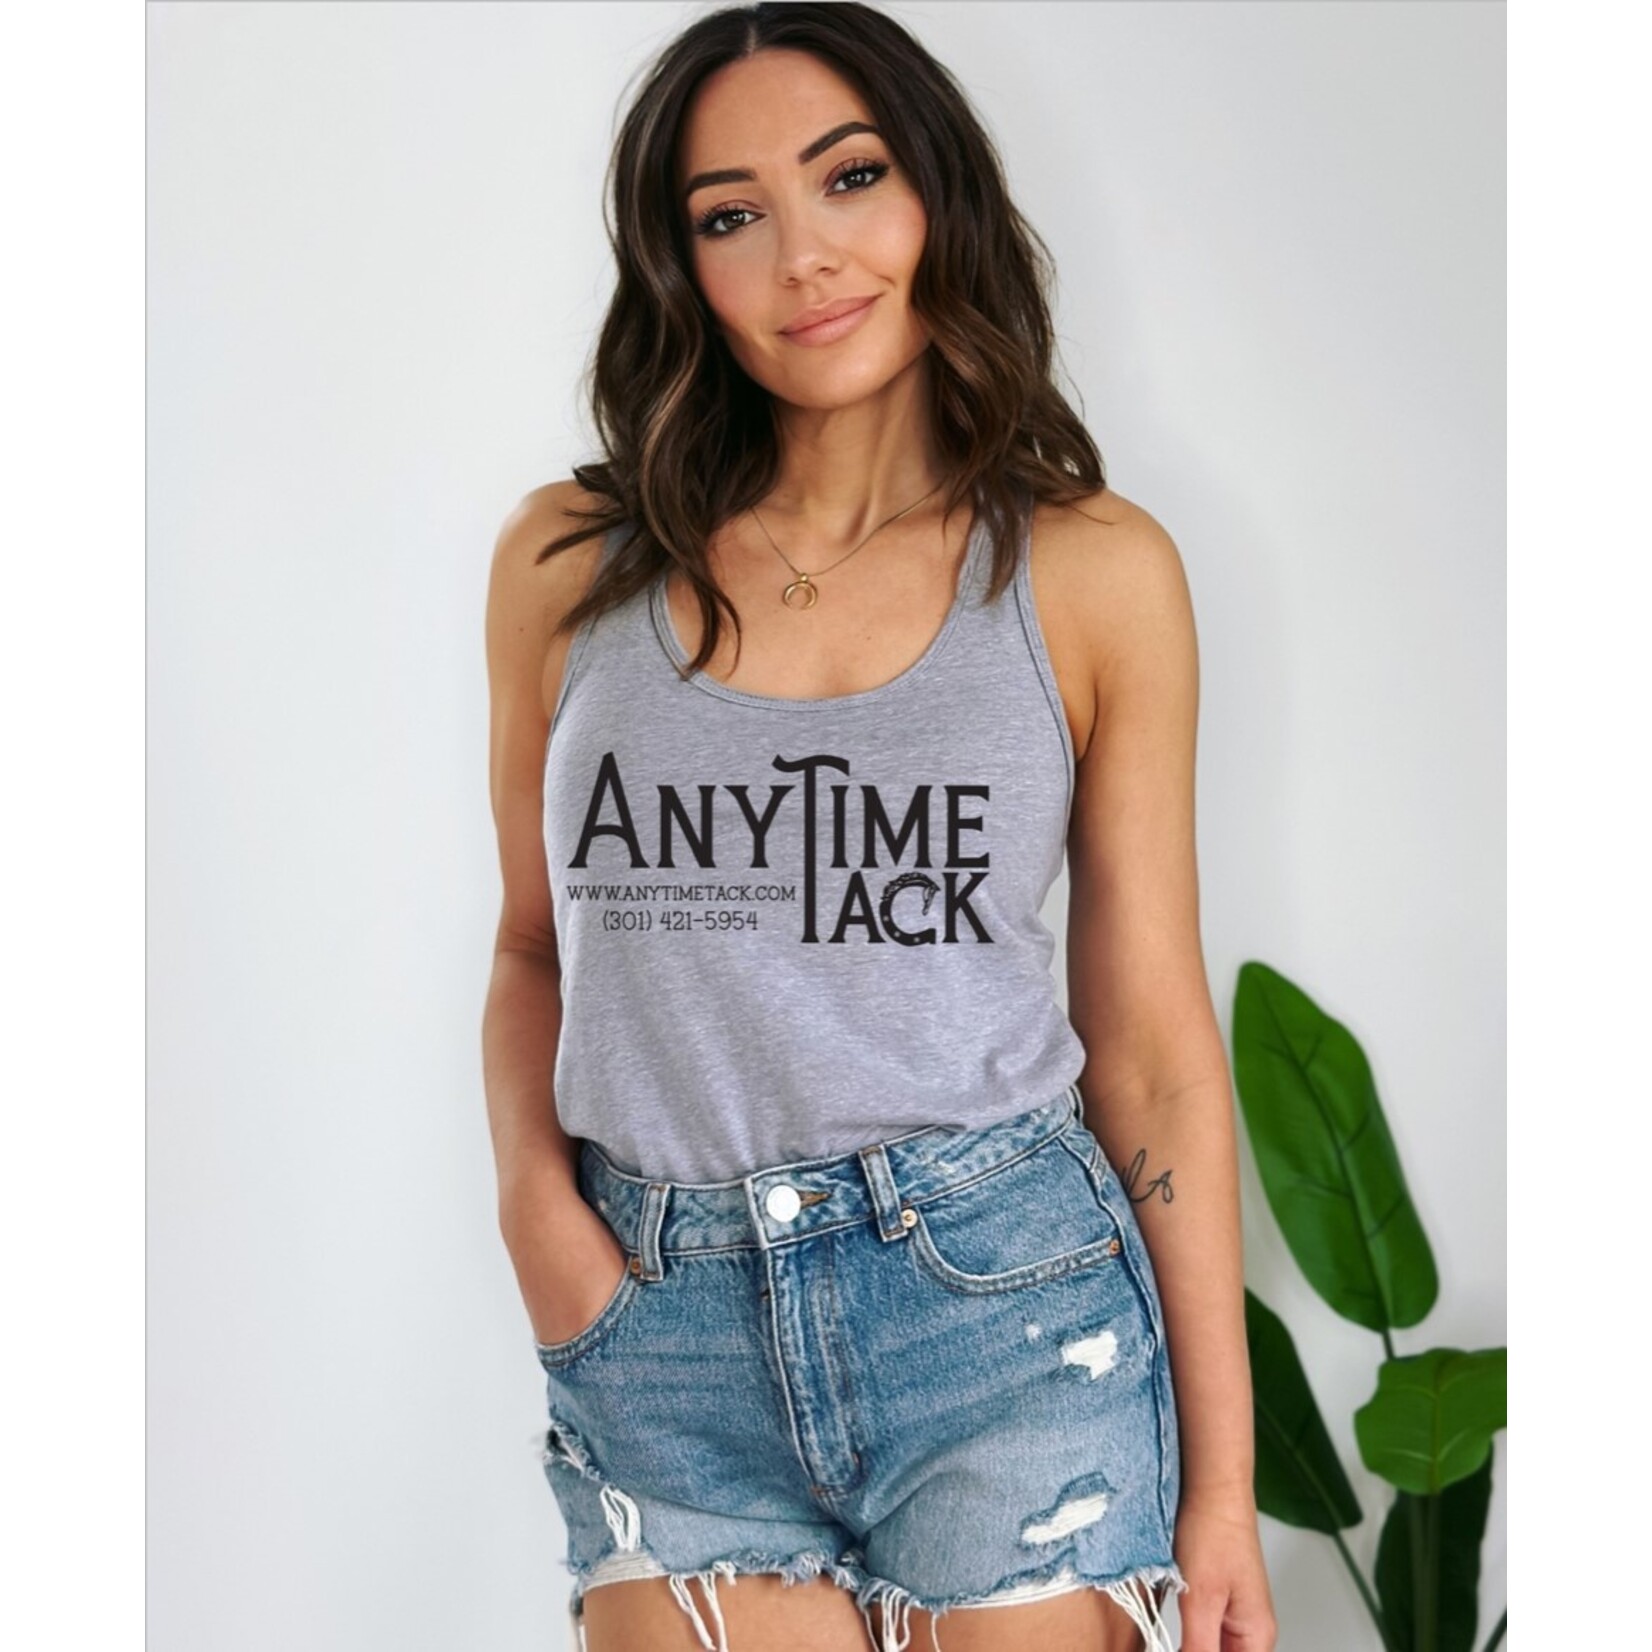 Timeless Anytime Tack Tank Top